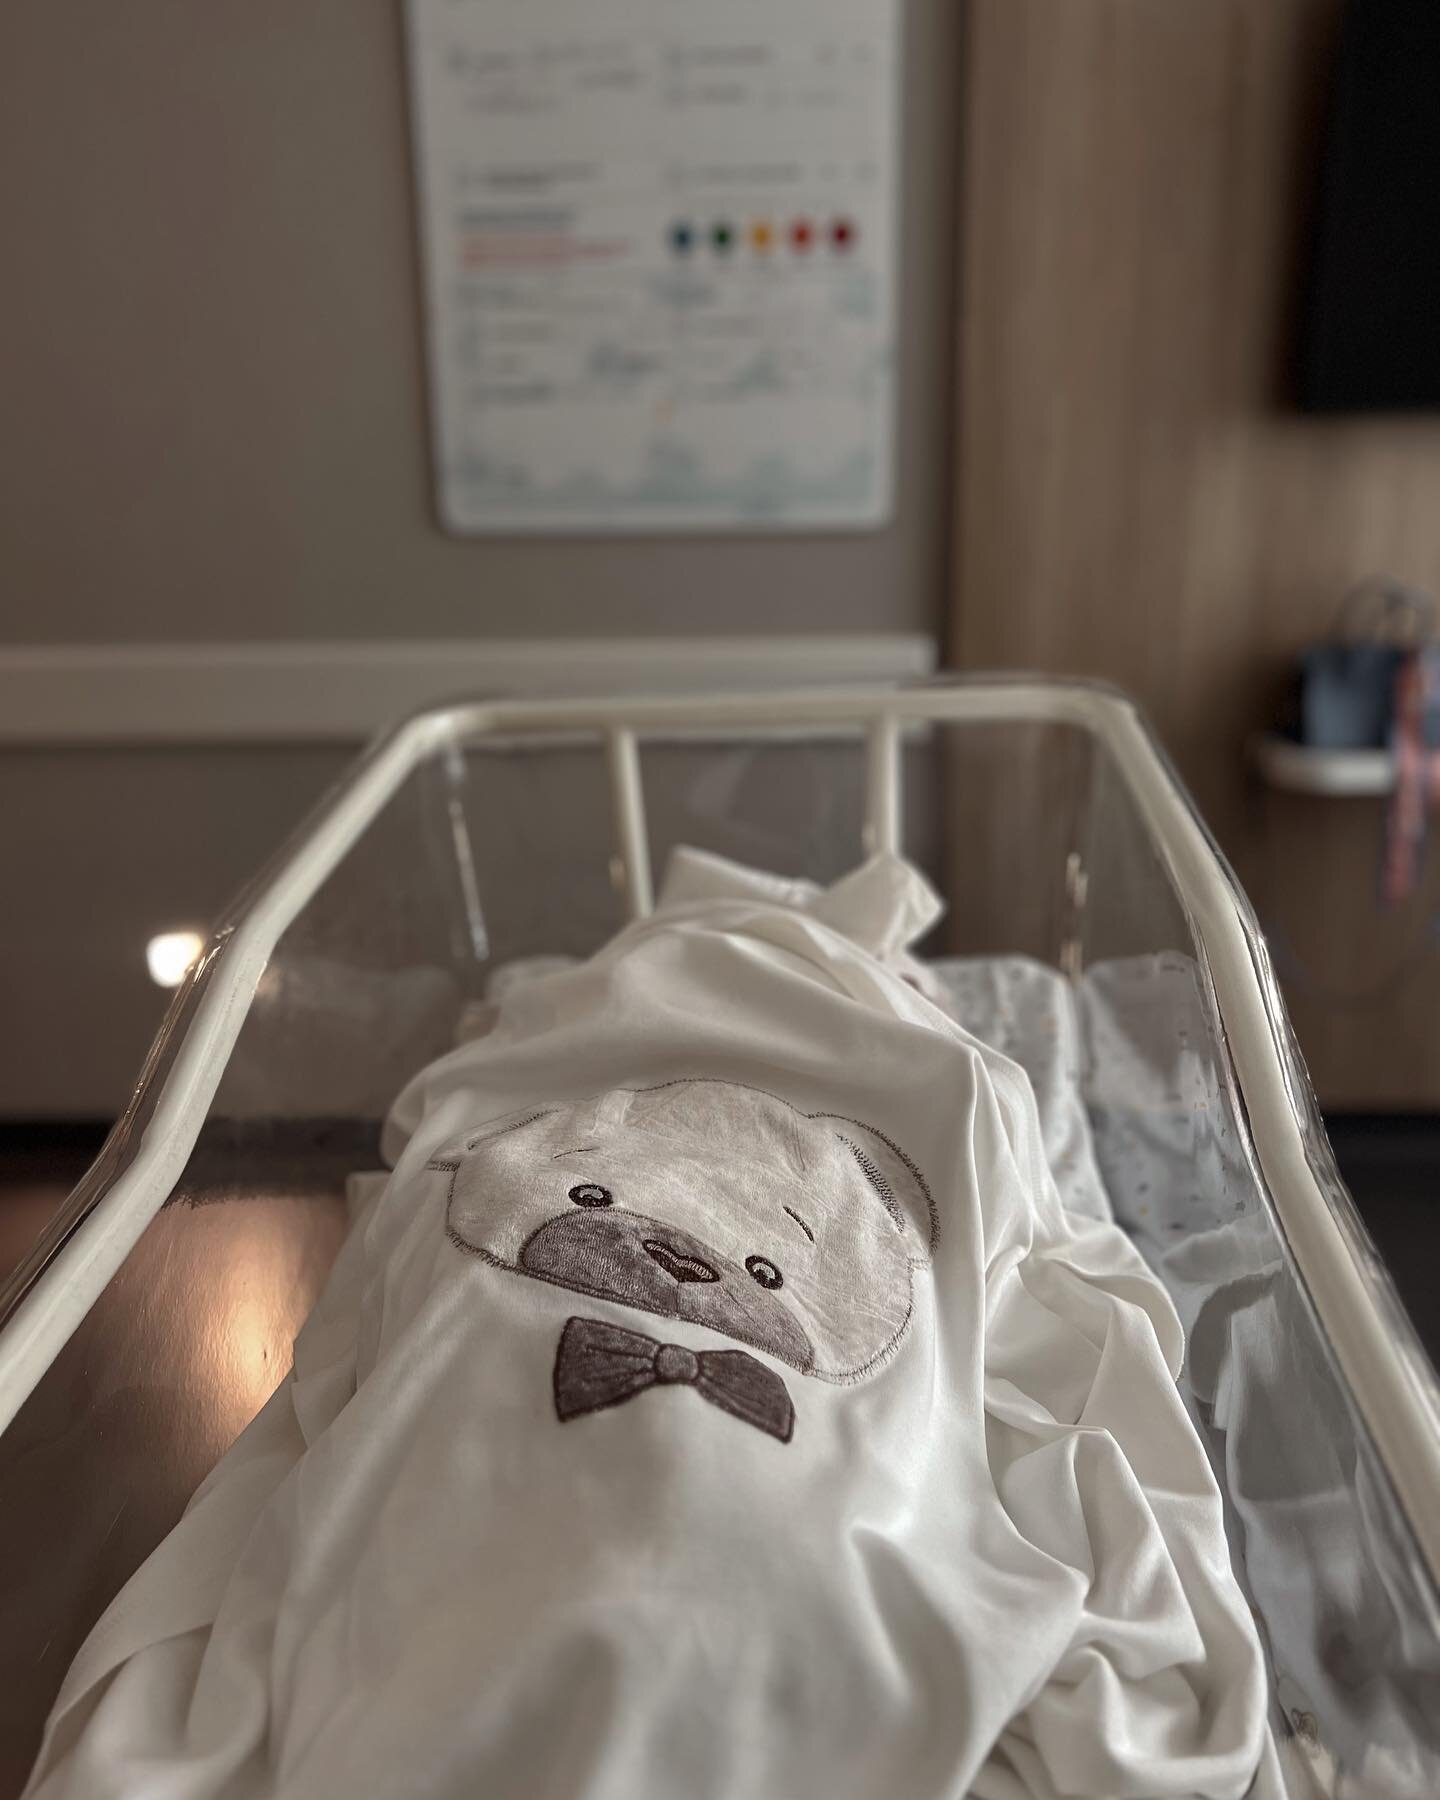 3.11.23 Welcome to this world, Leonard. &hearts;️ My heart is full of love now more than ever.